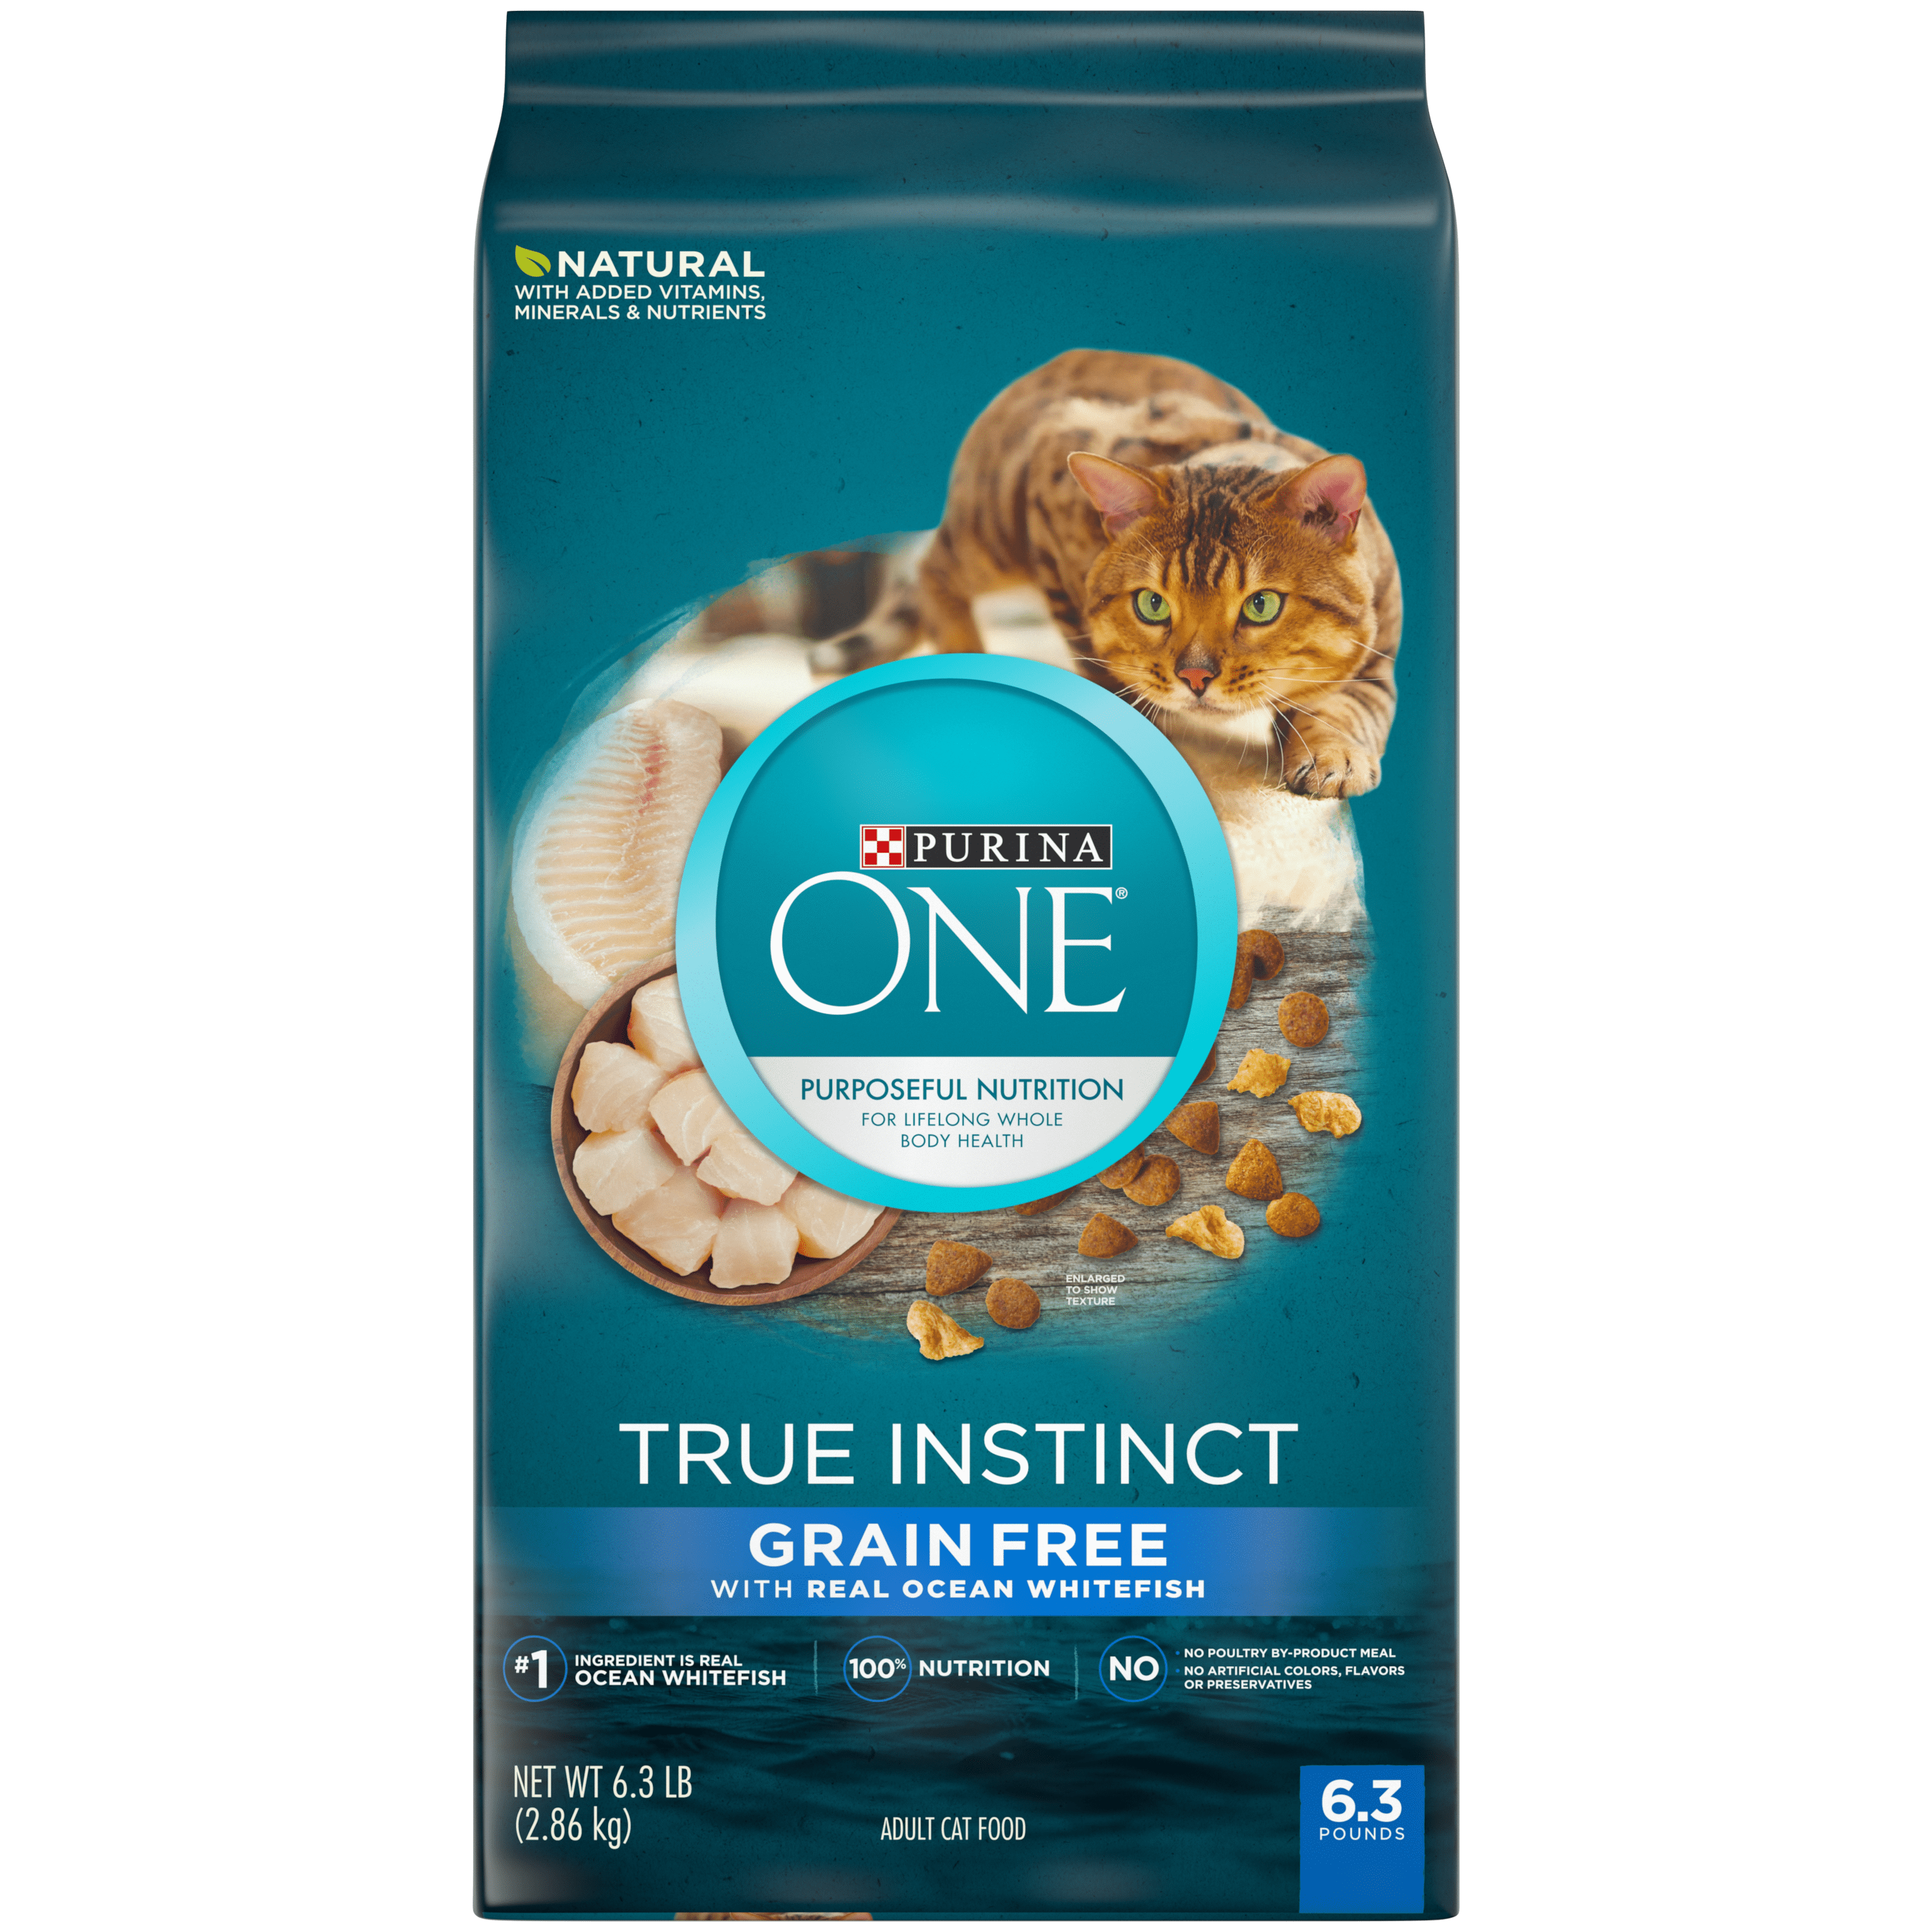 Purina ONE Natural, High Protein, Grain Free Dry Cat Food; True